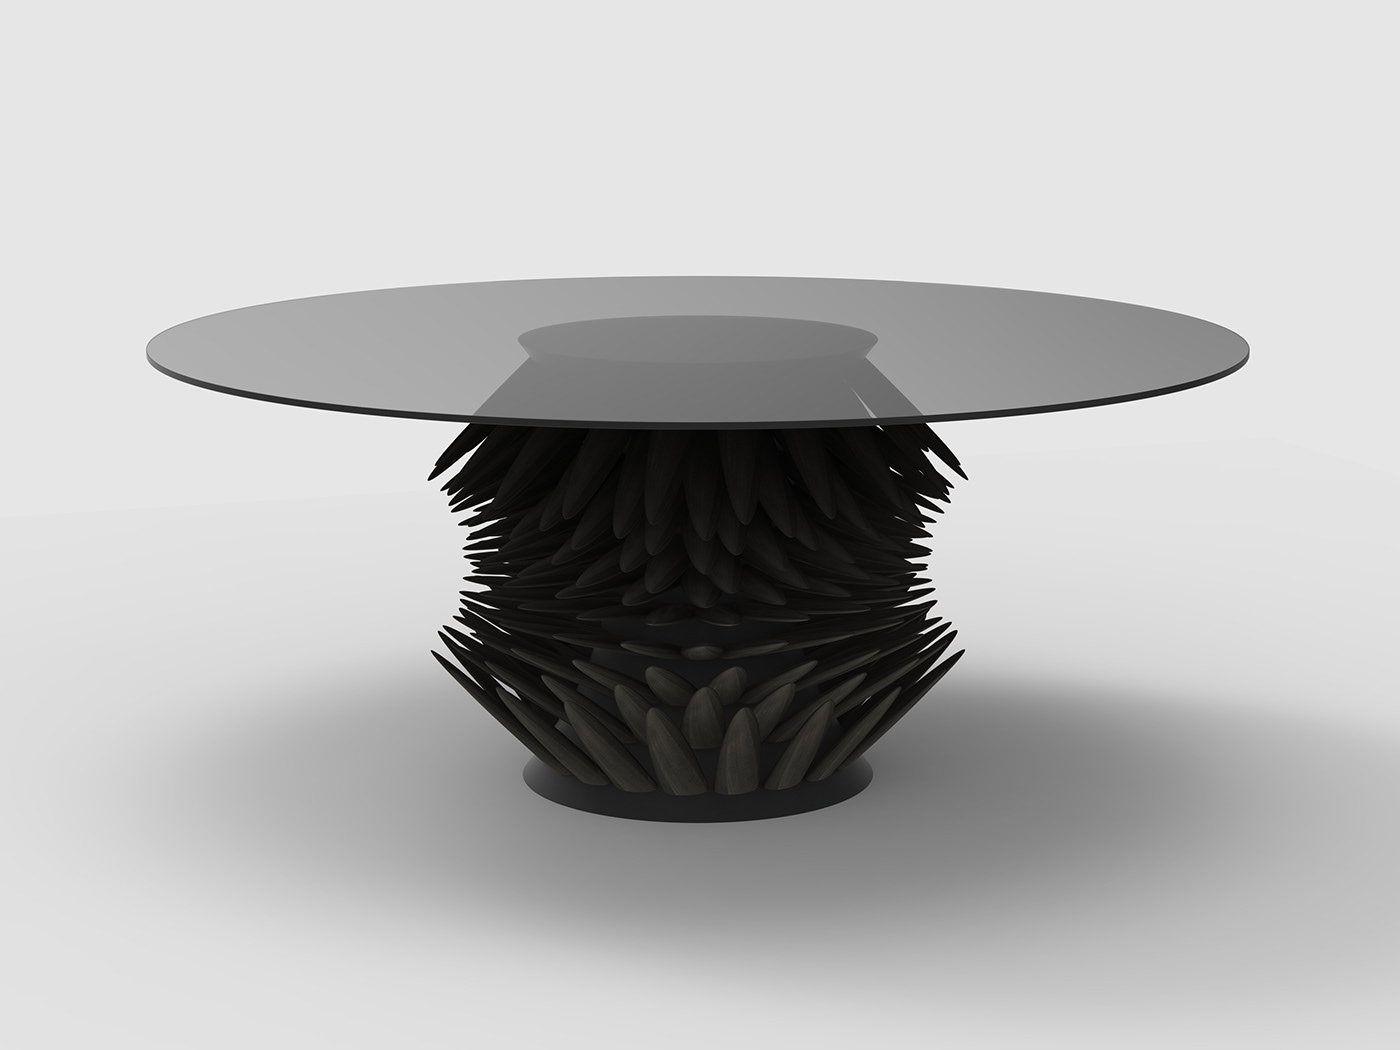 spine quill table furniture jason phillips design modern metal glass jason phillips jasonphillipsdesign